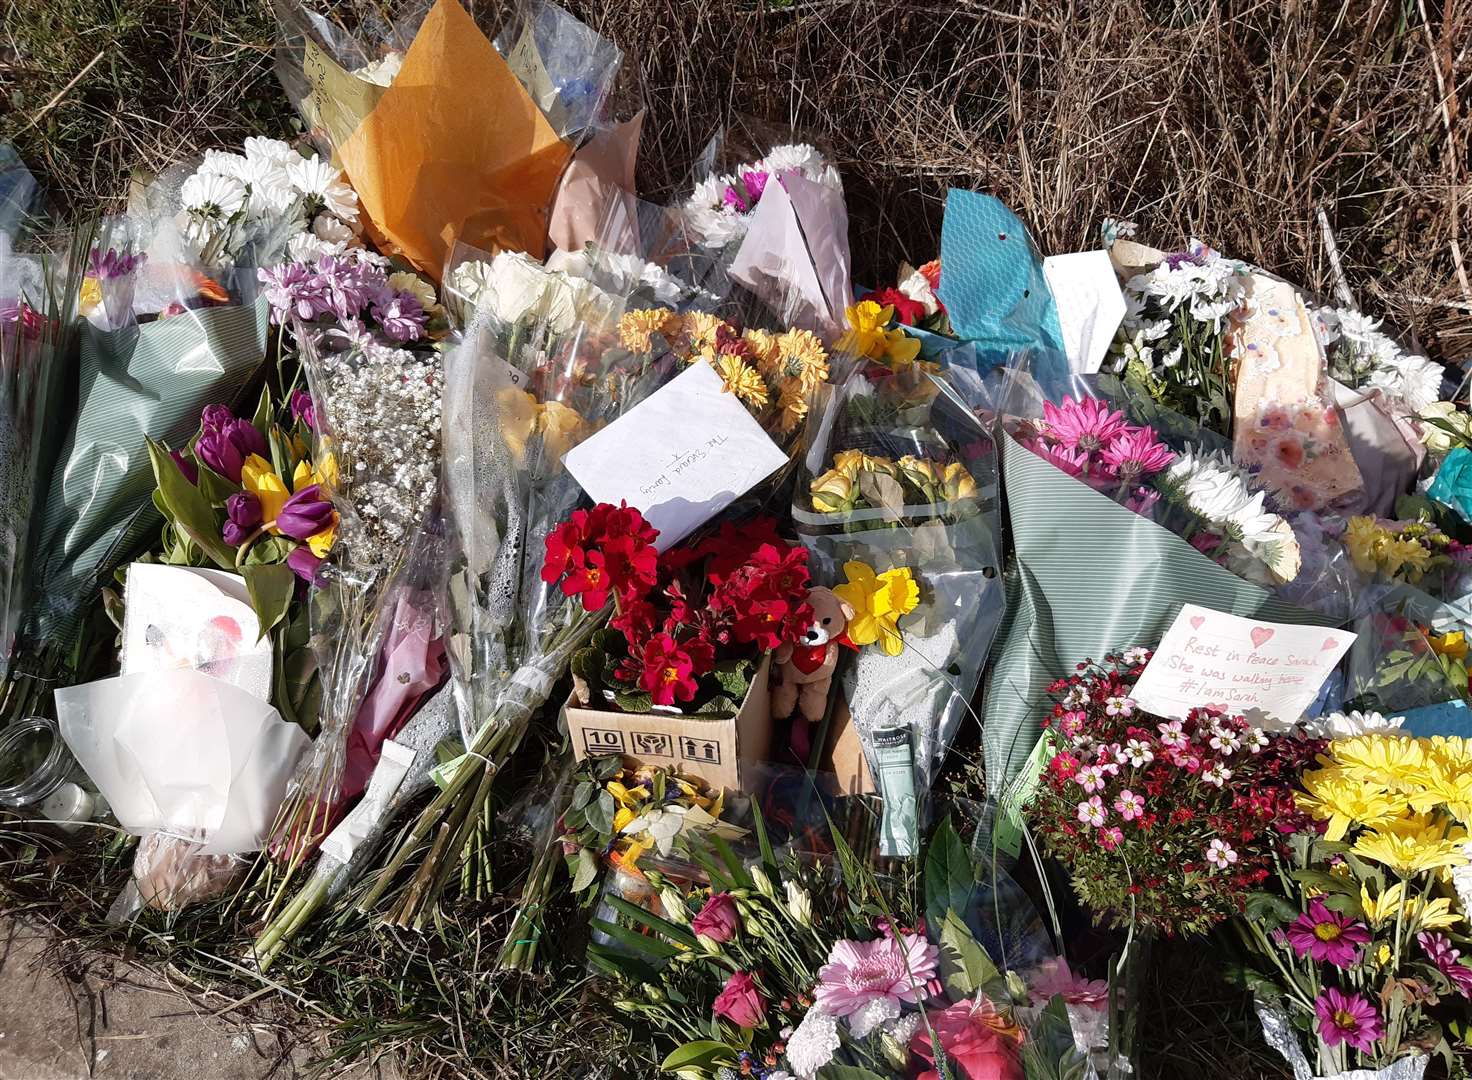 Scores of tributes have been left in Bears Lane